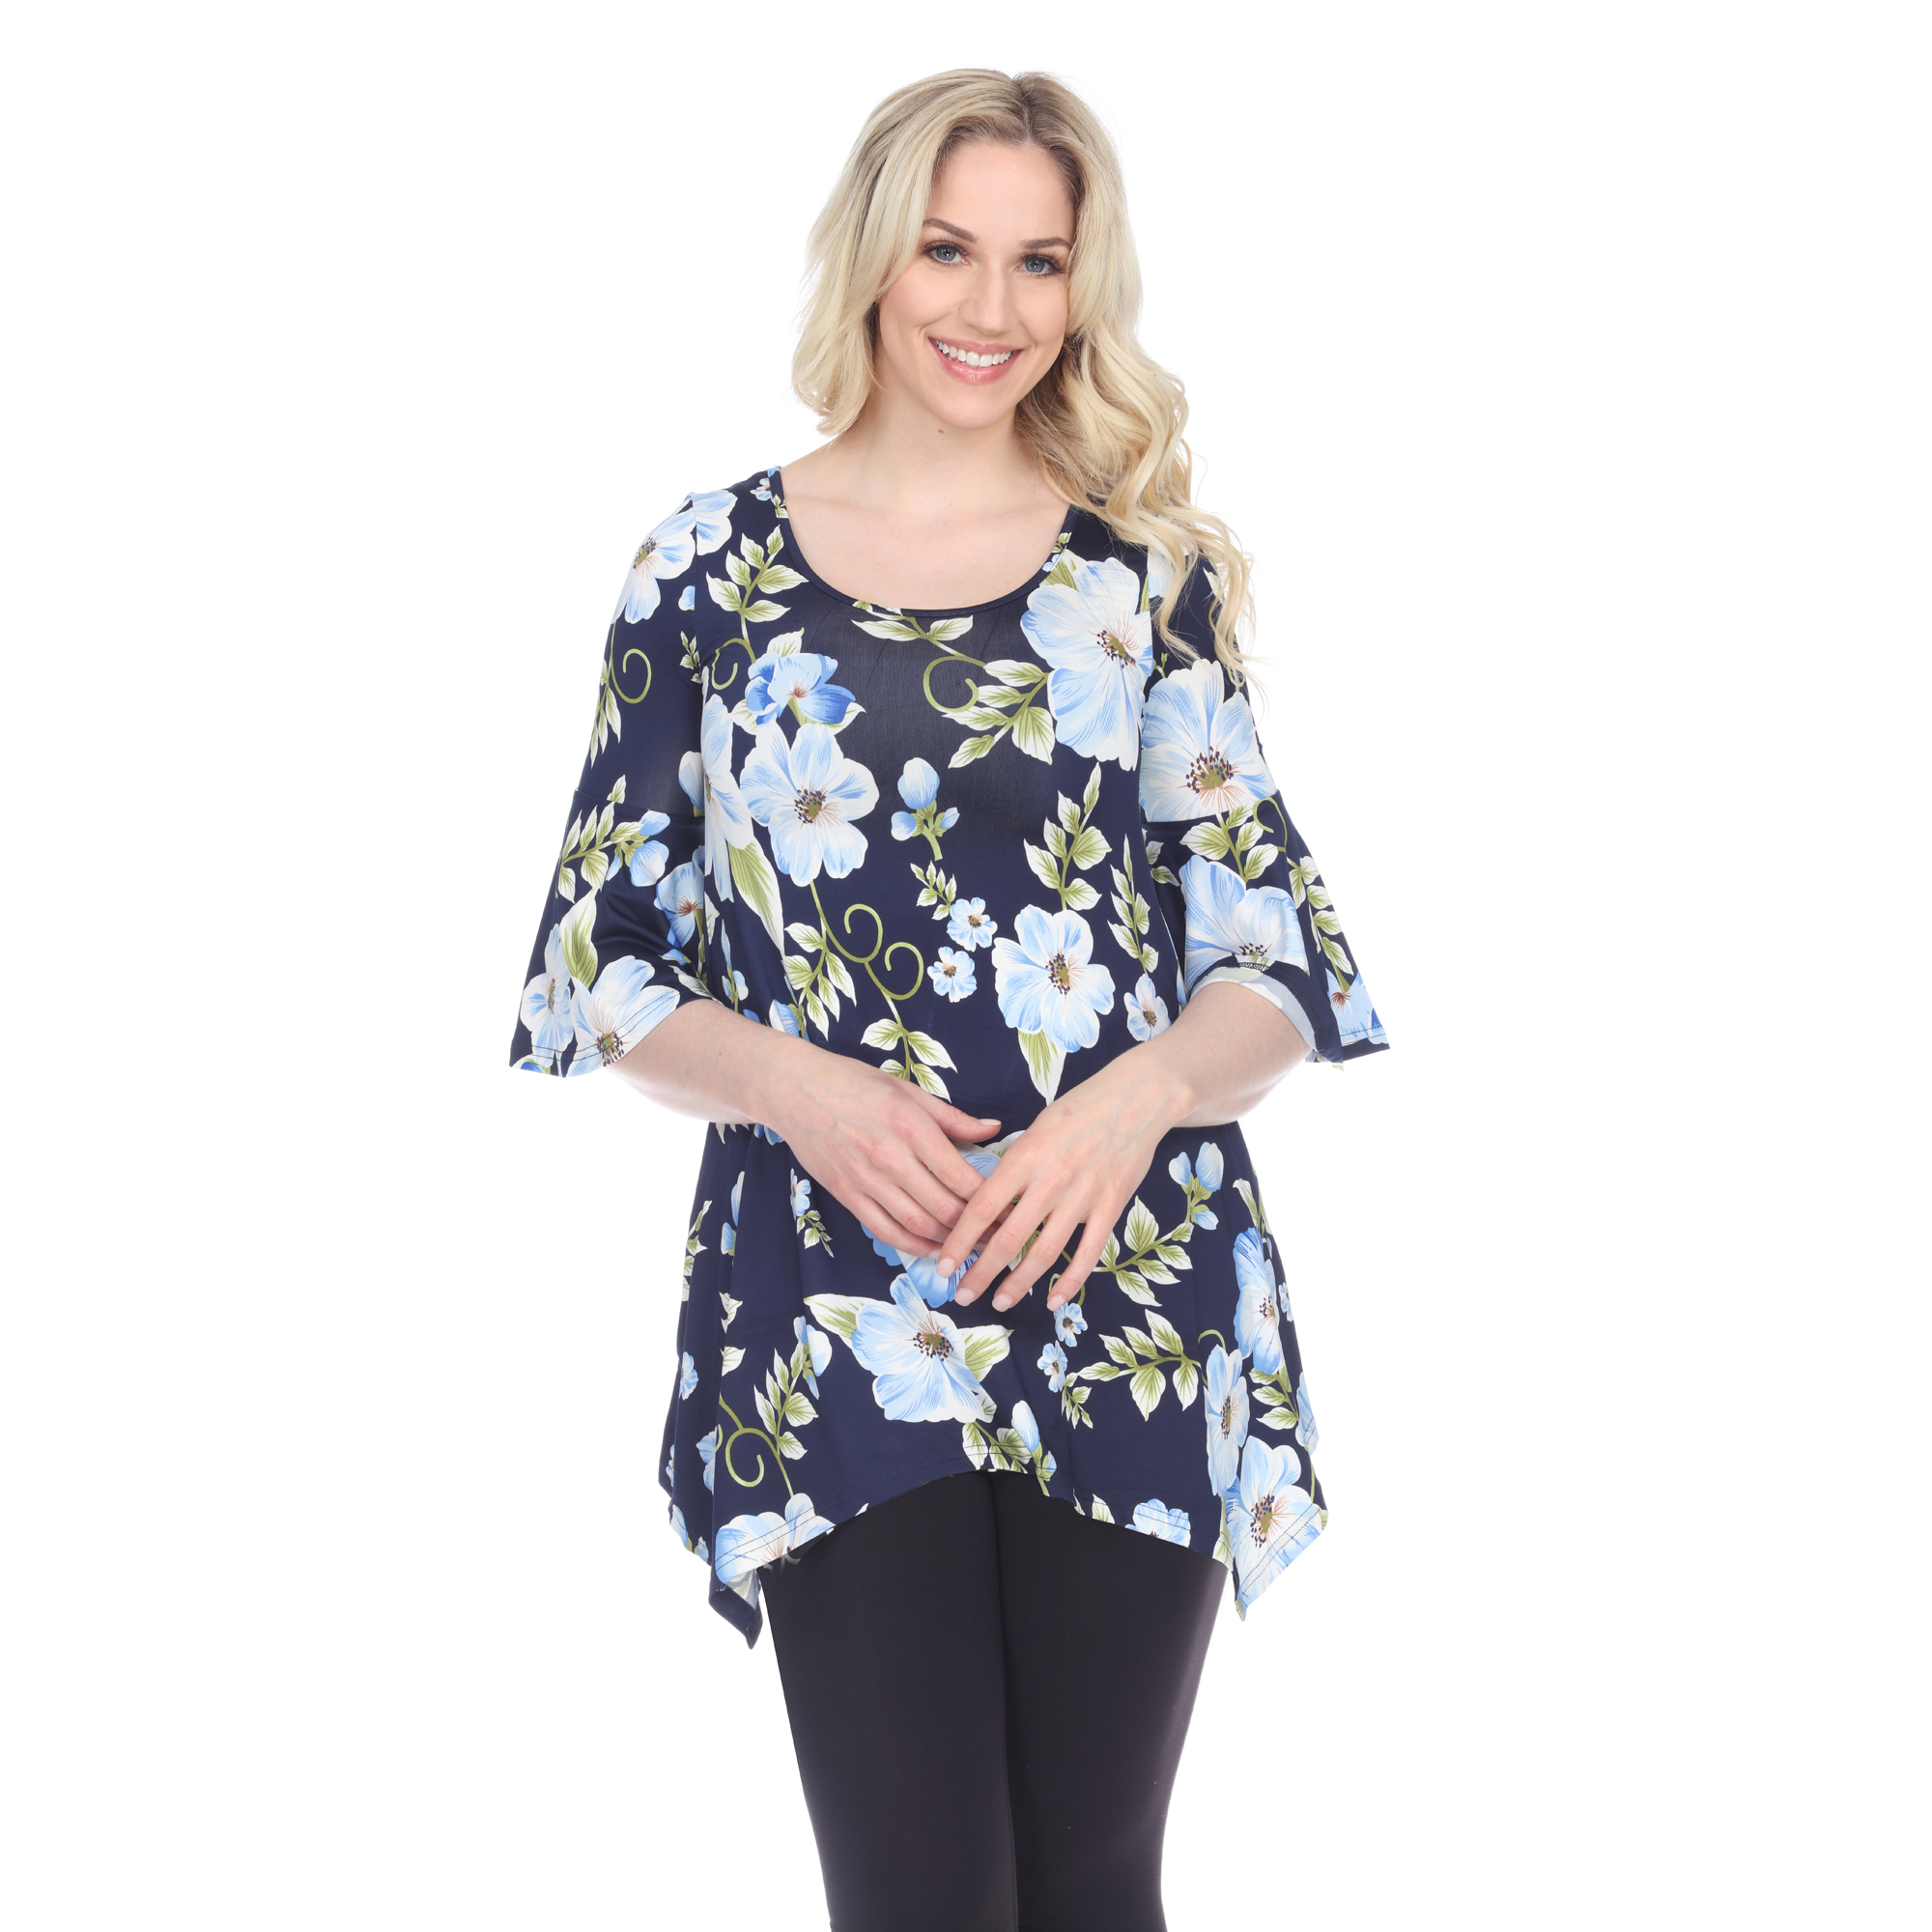 White Mark Women's Floral Print Quarter Sleeve Tunic Top With Pockets - Blue, Medium